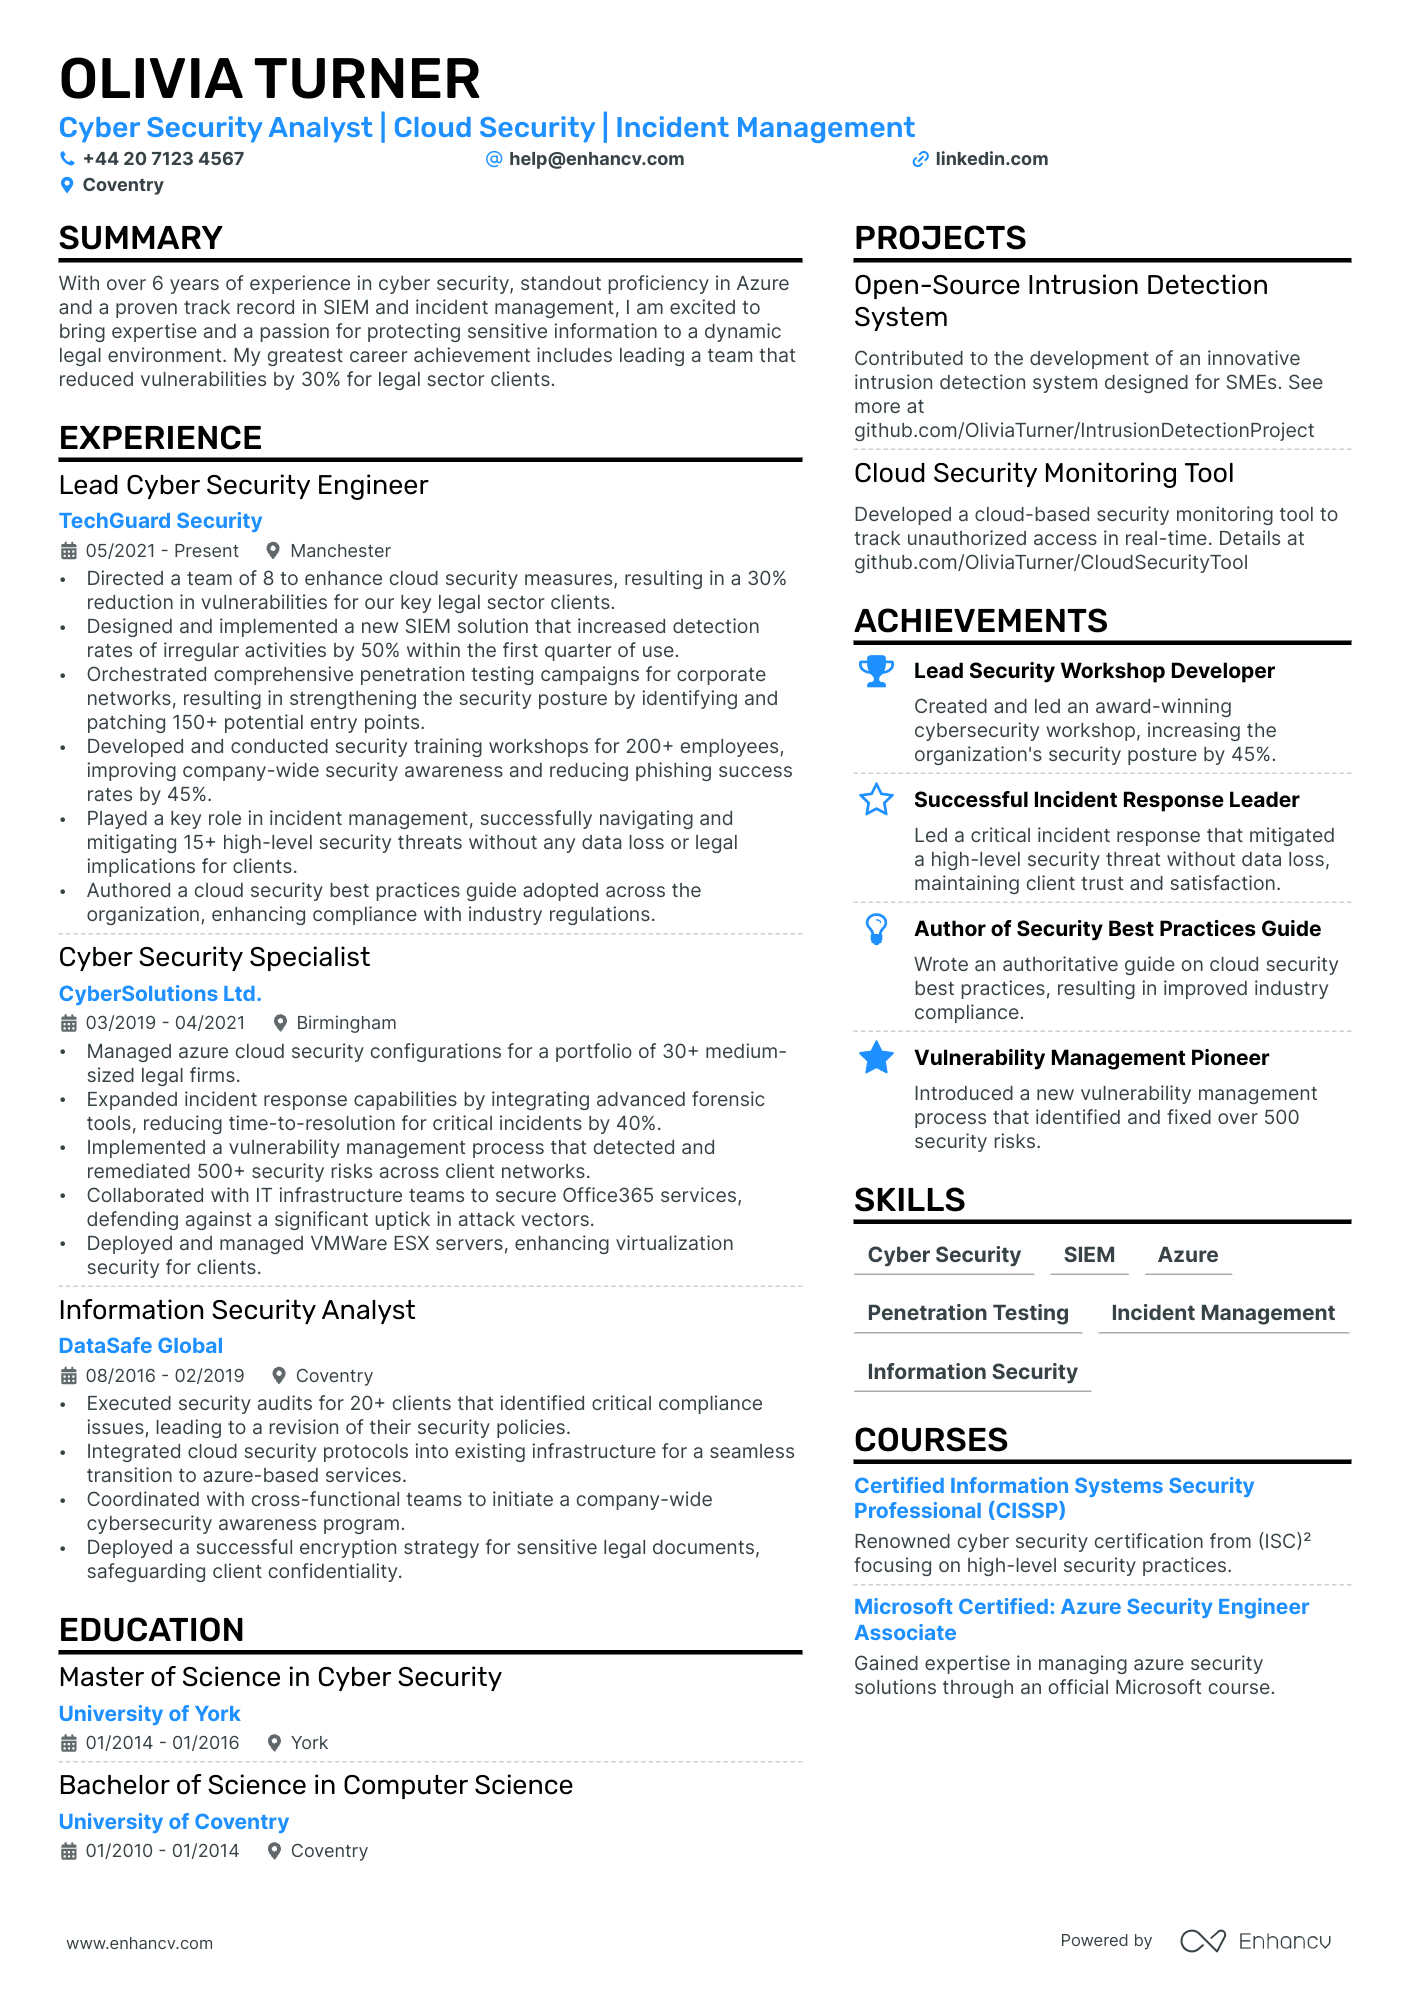 Cyber Security Analyst cv example